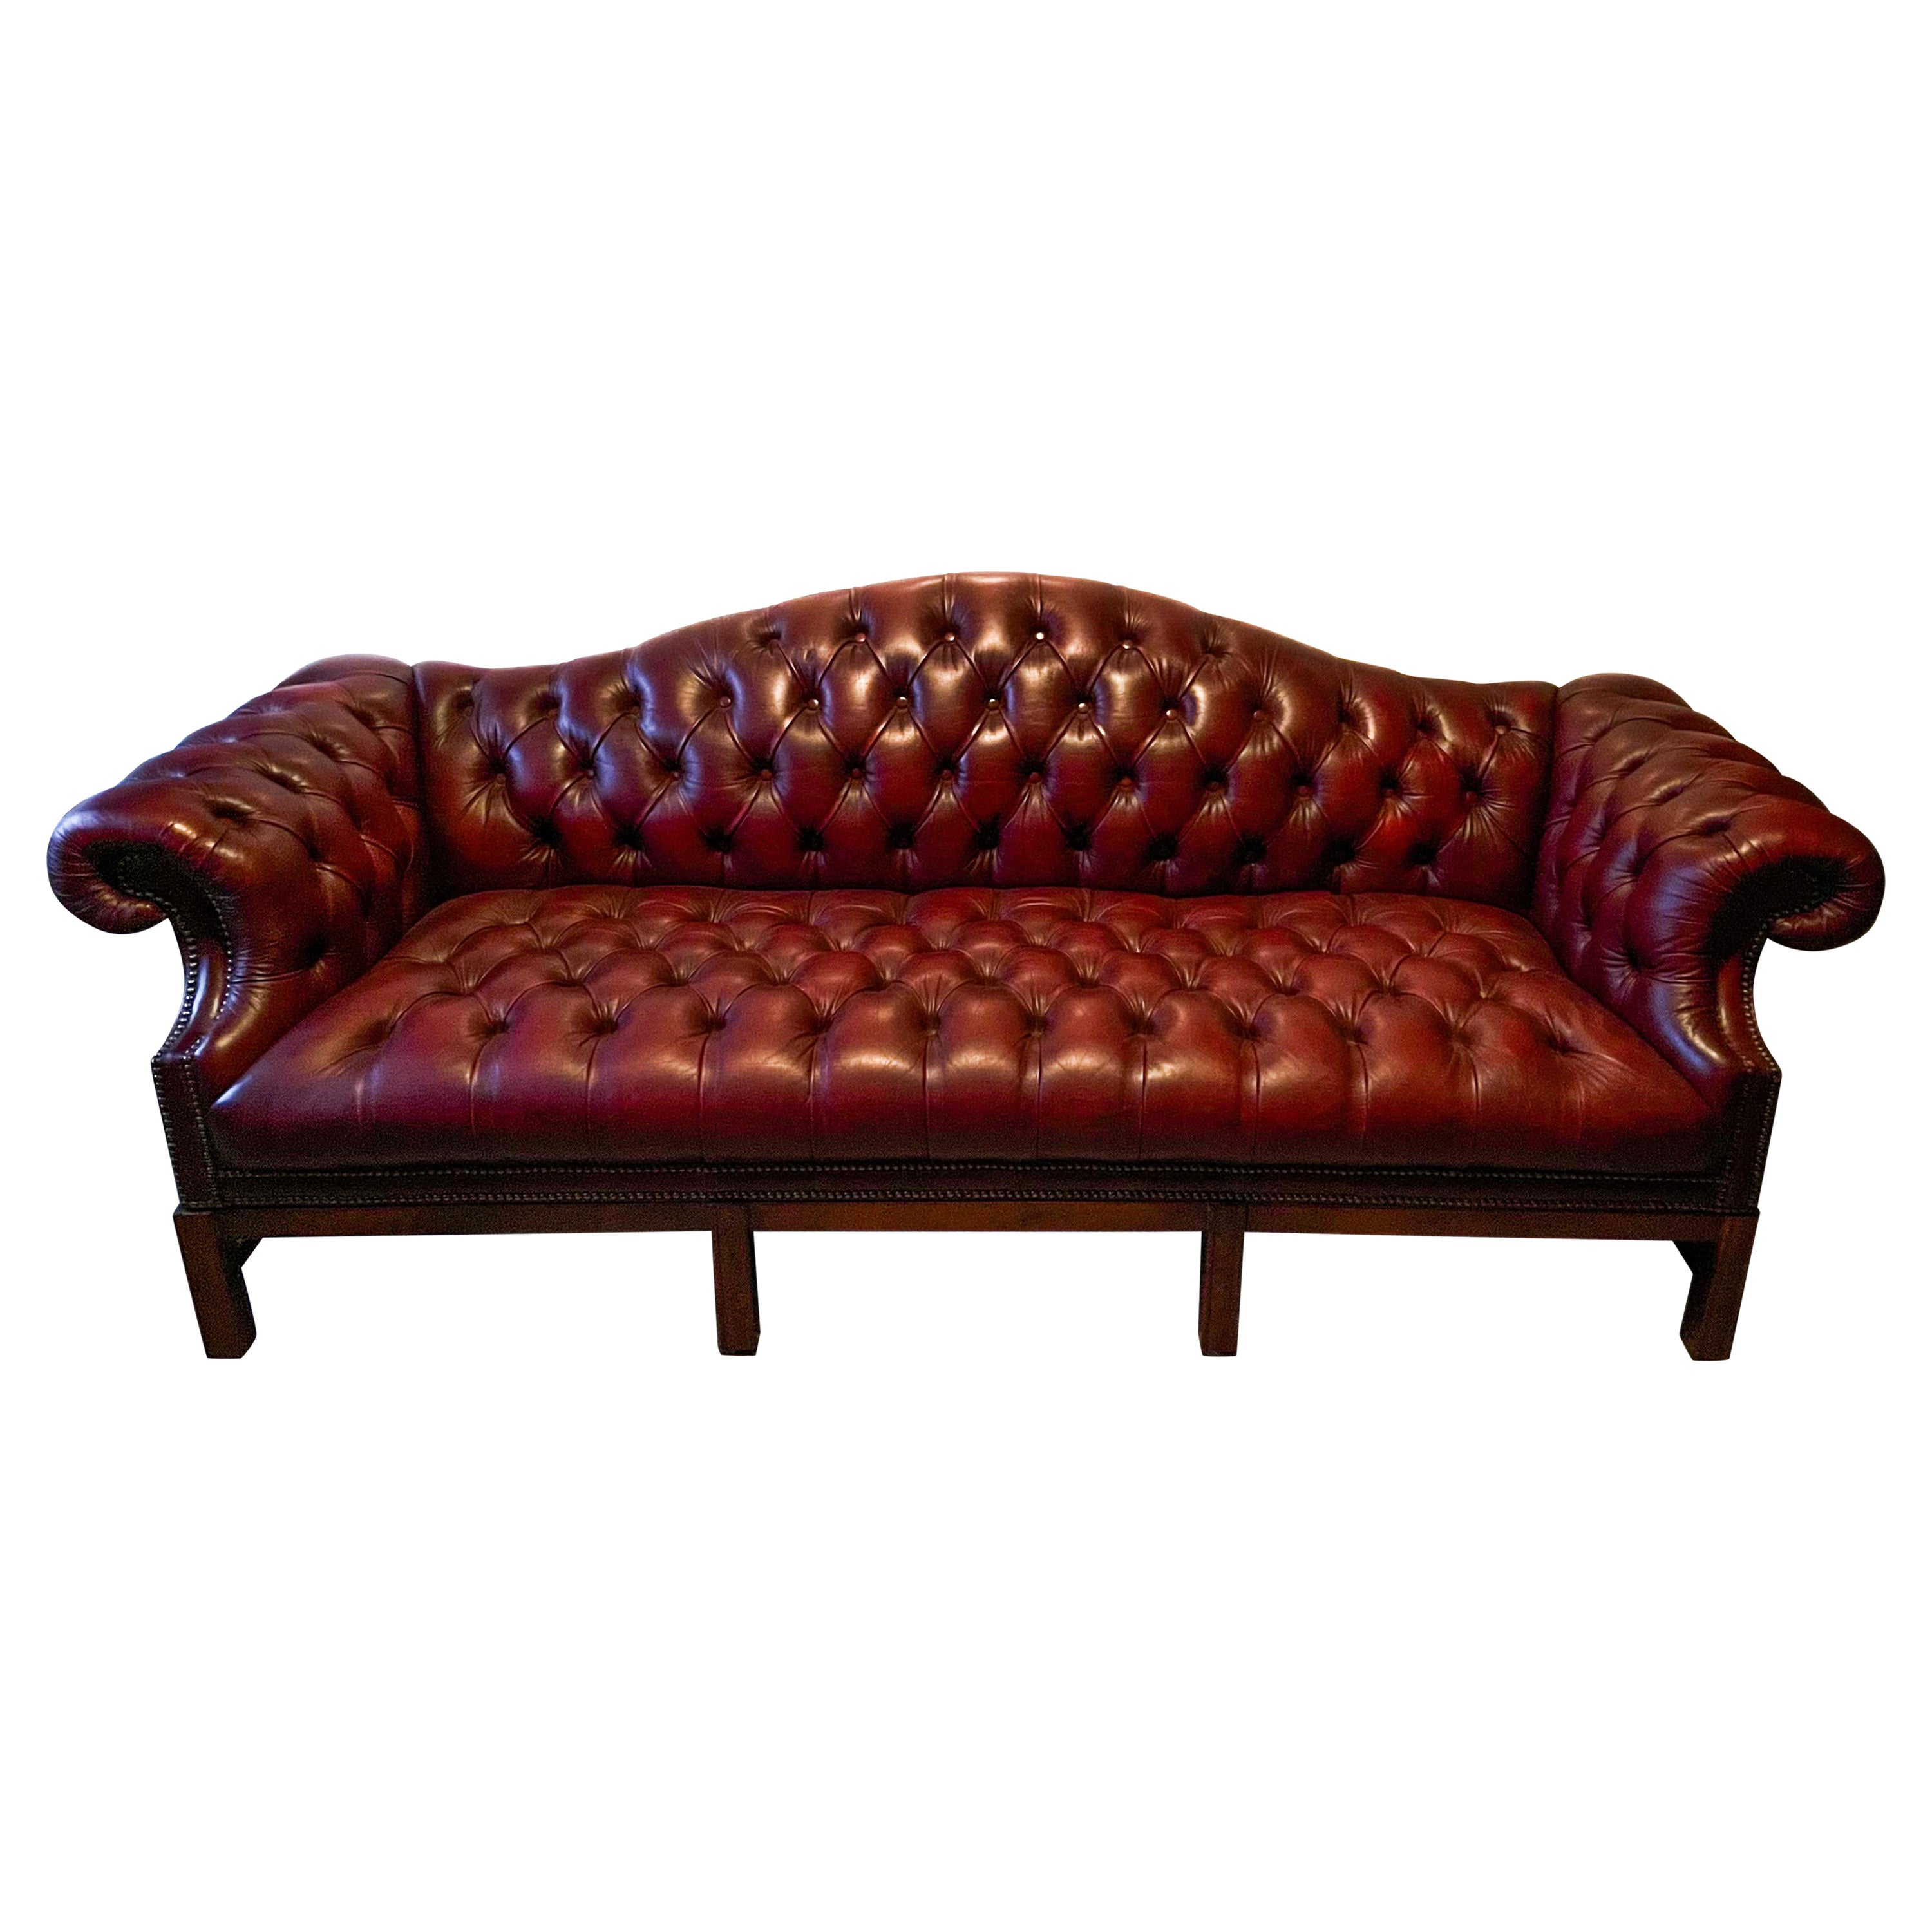 1950s English Burgundy Tufted Leather Chesterfield Camelback Sofa